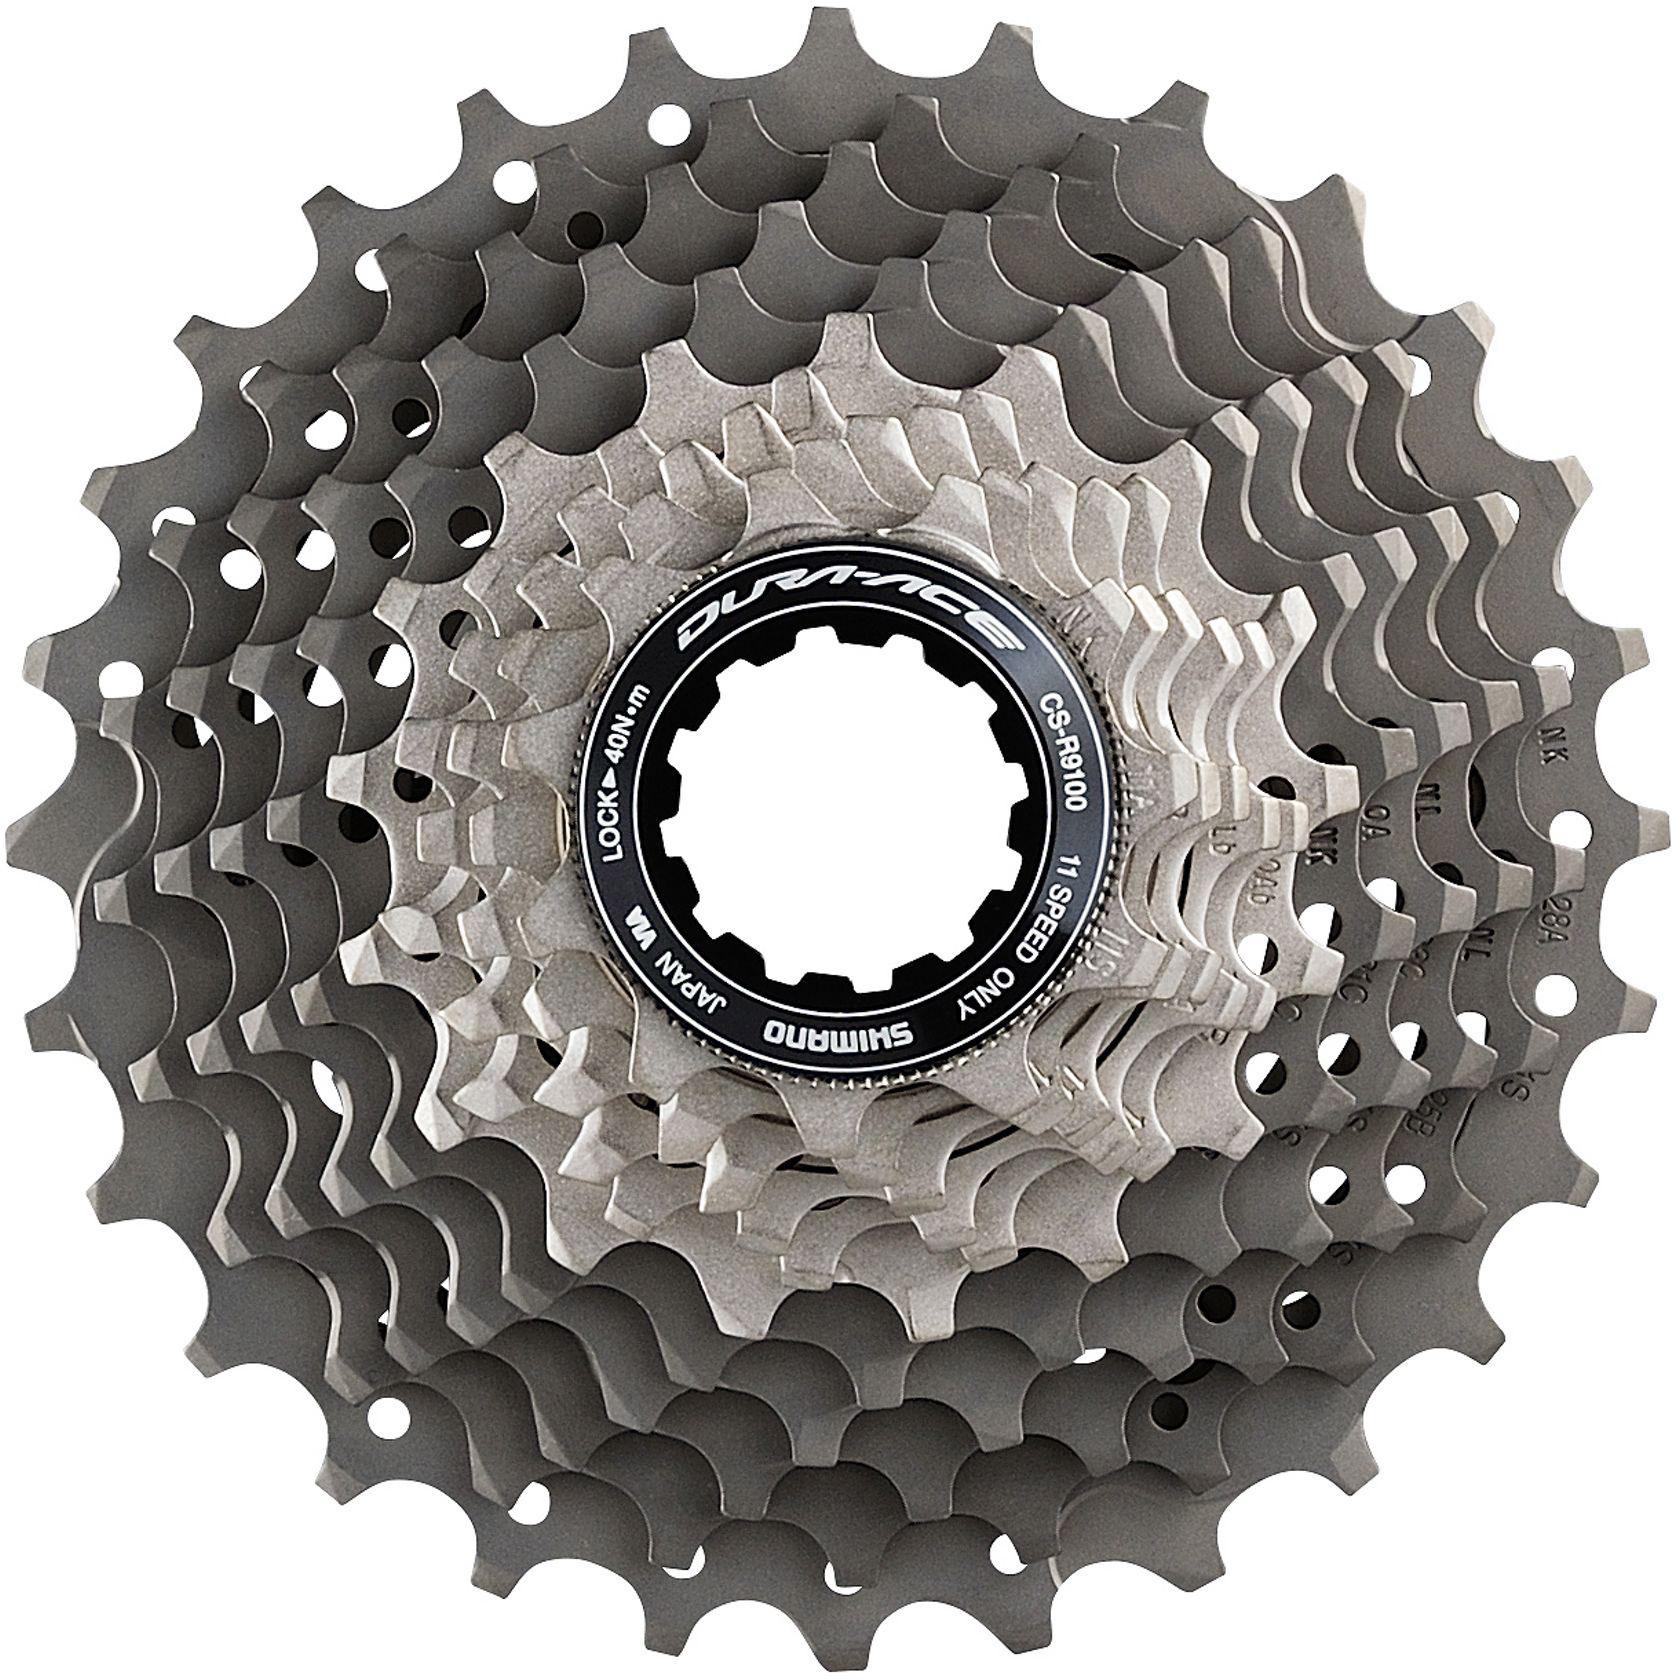 Shimano Dura Ace R9100 11 Speed 12-25 Cassette - Silver